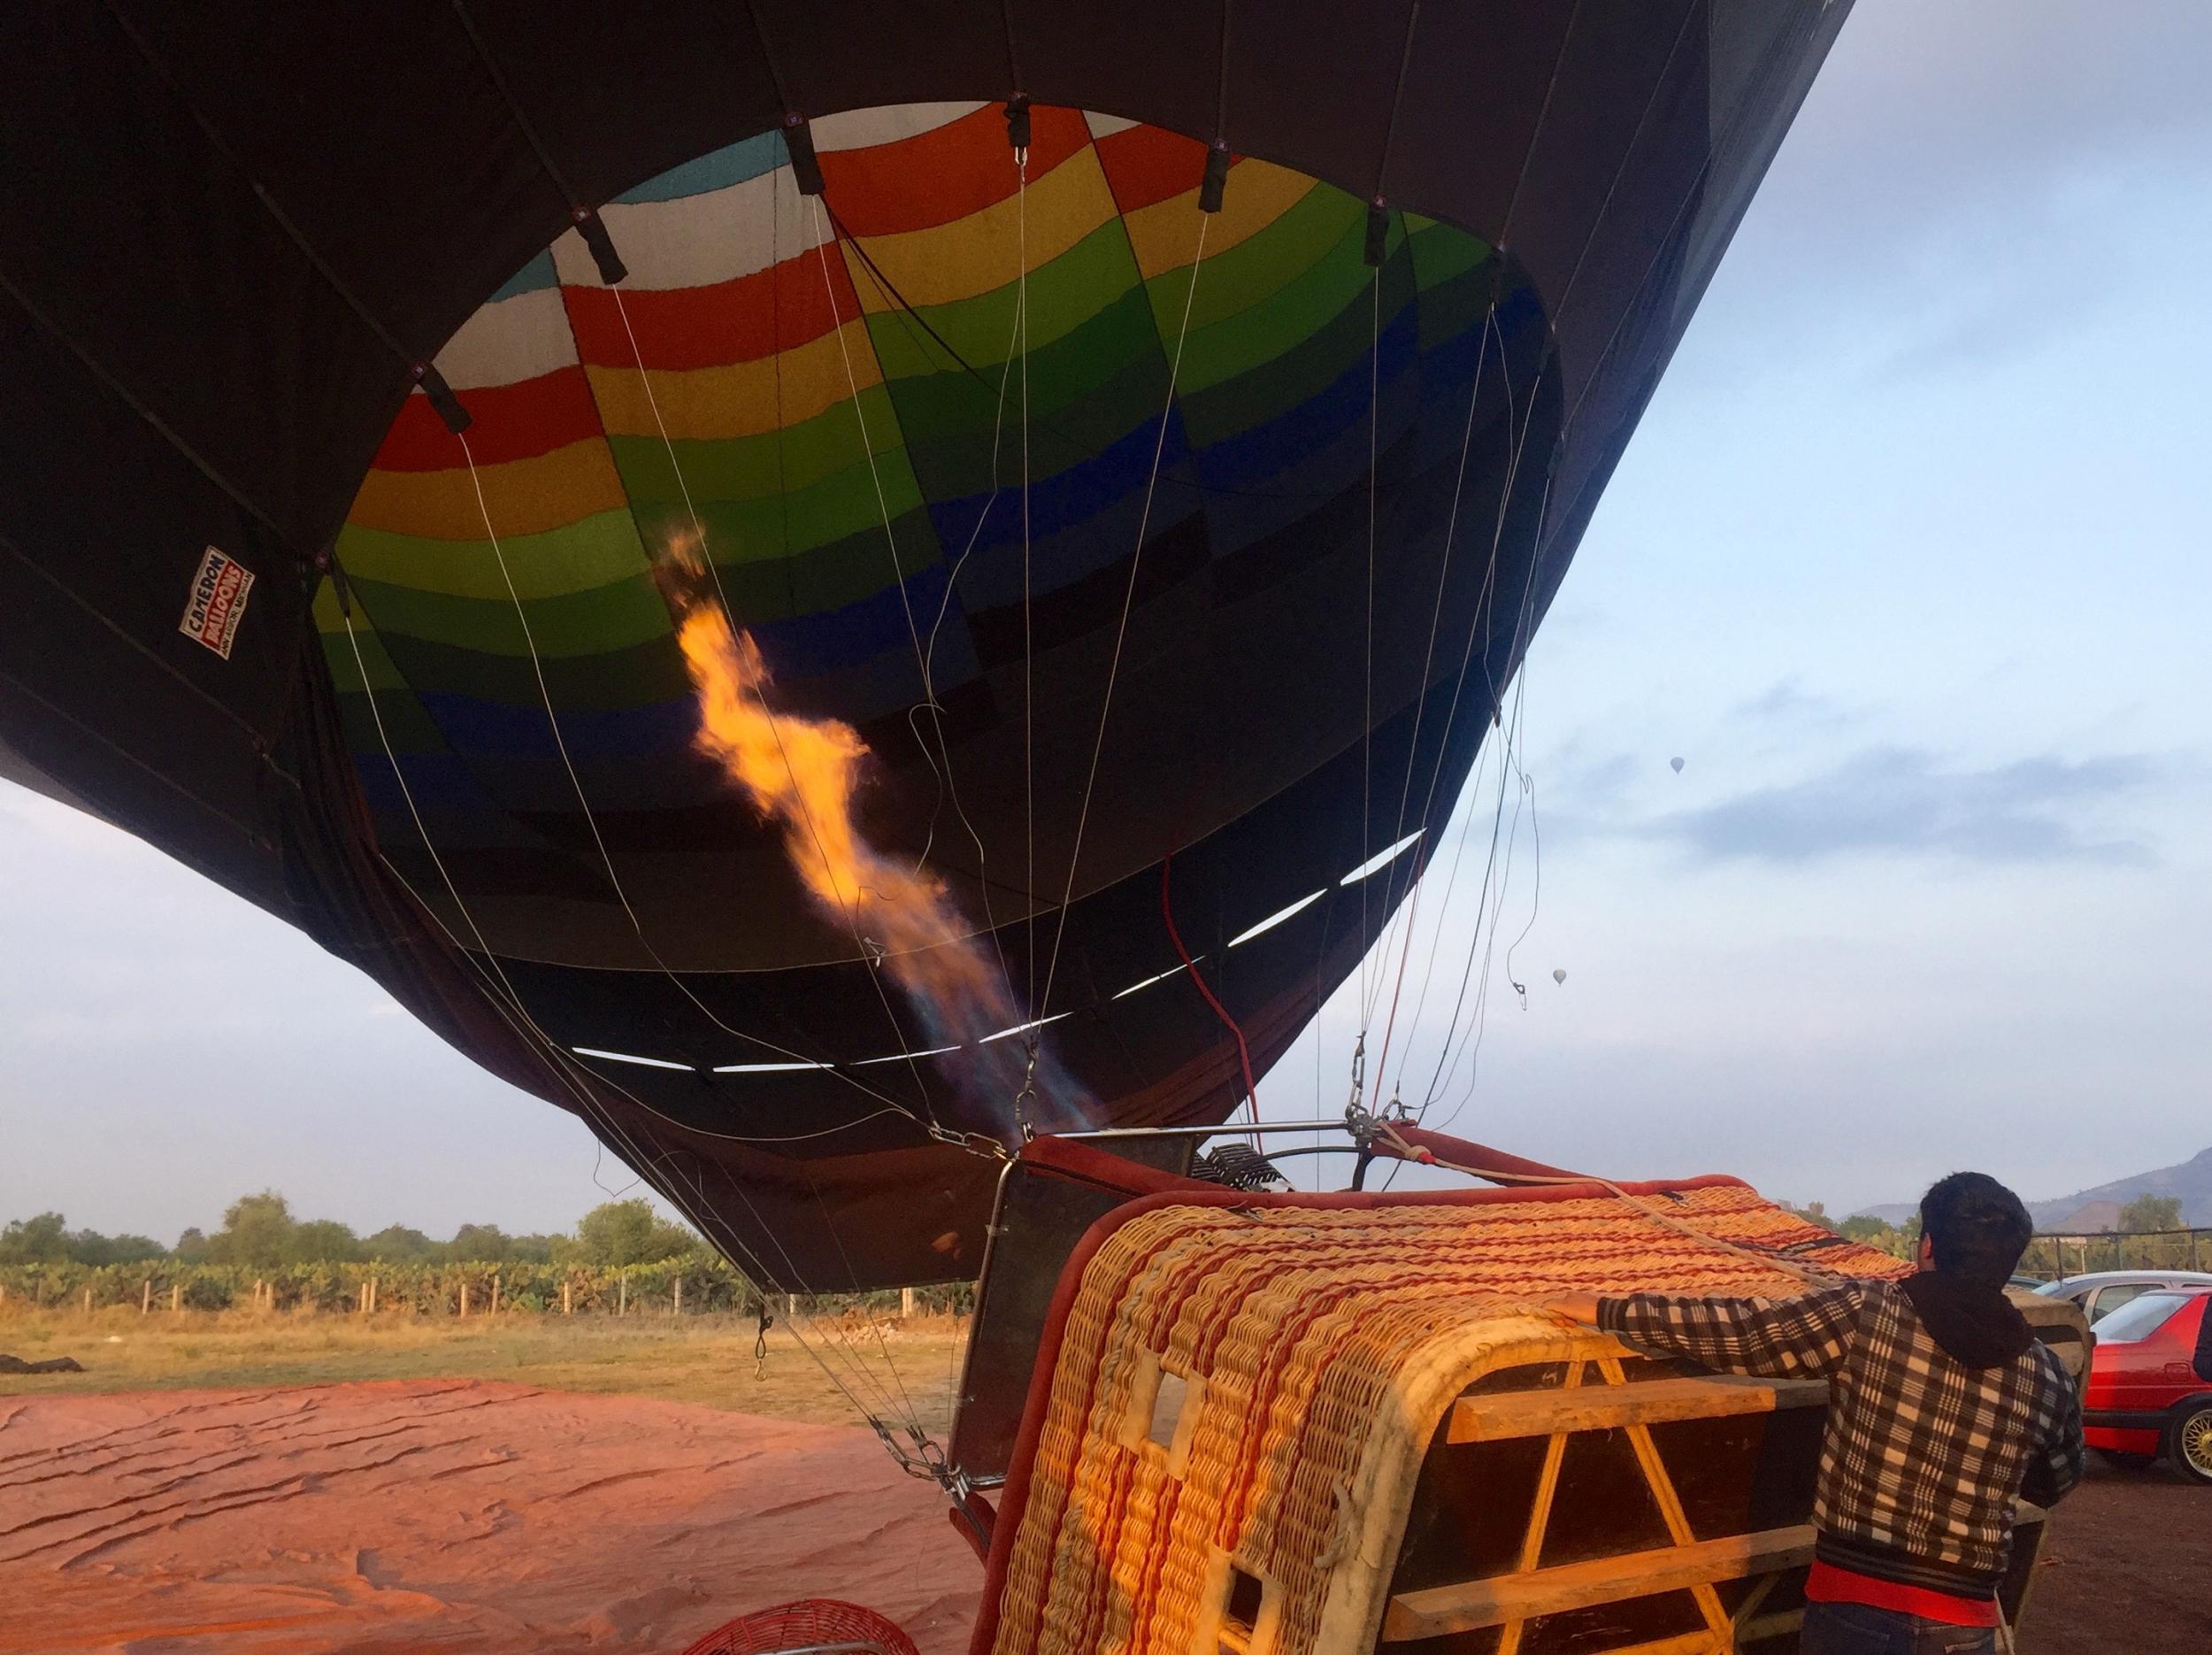 The crew fill up the balloon